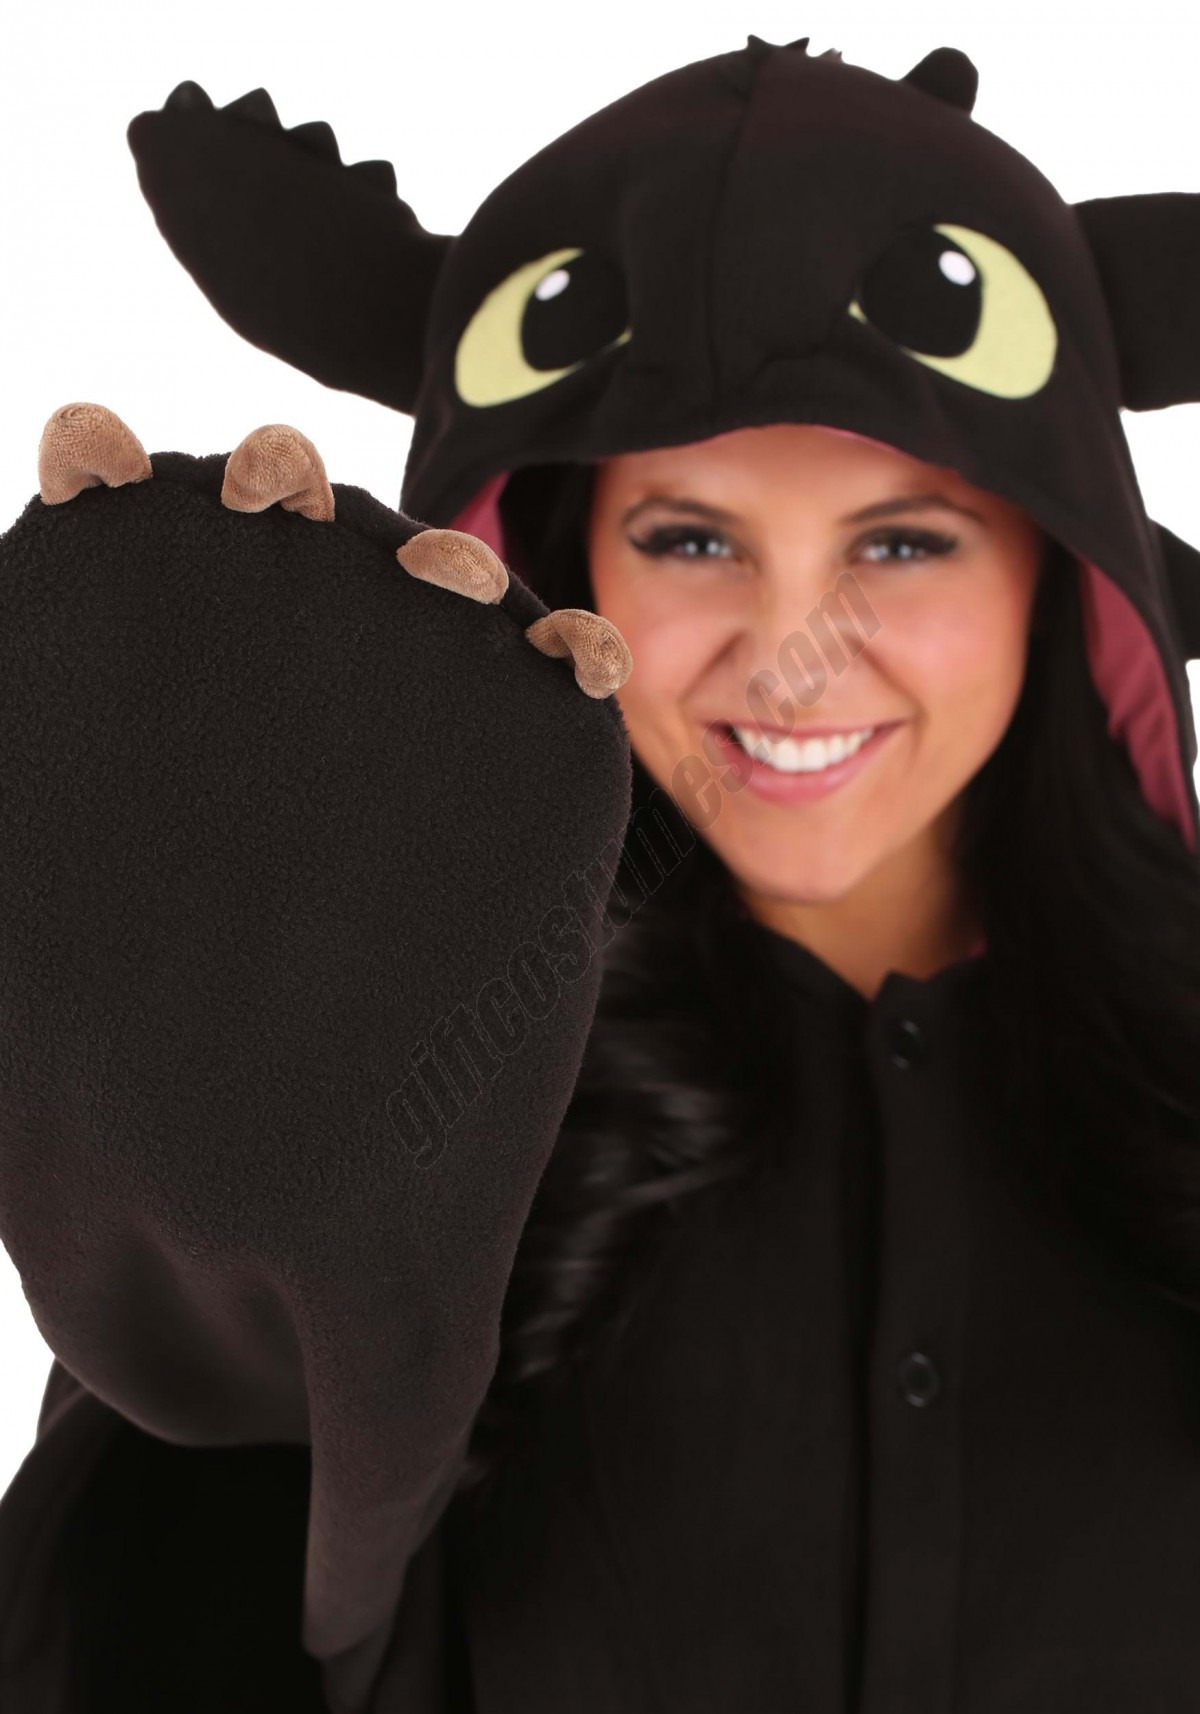 How to Train Your Dragon Toothless Adult Kigurumi Costume - Men's - -3